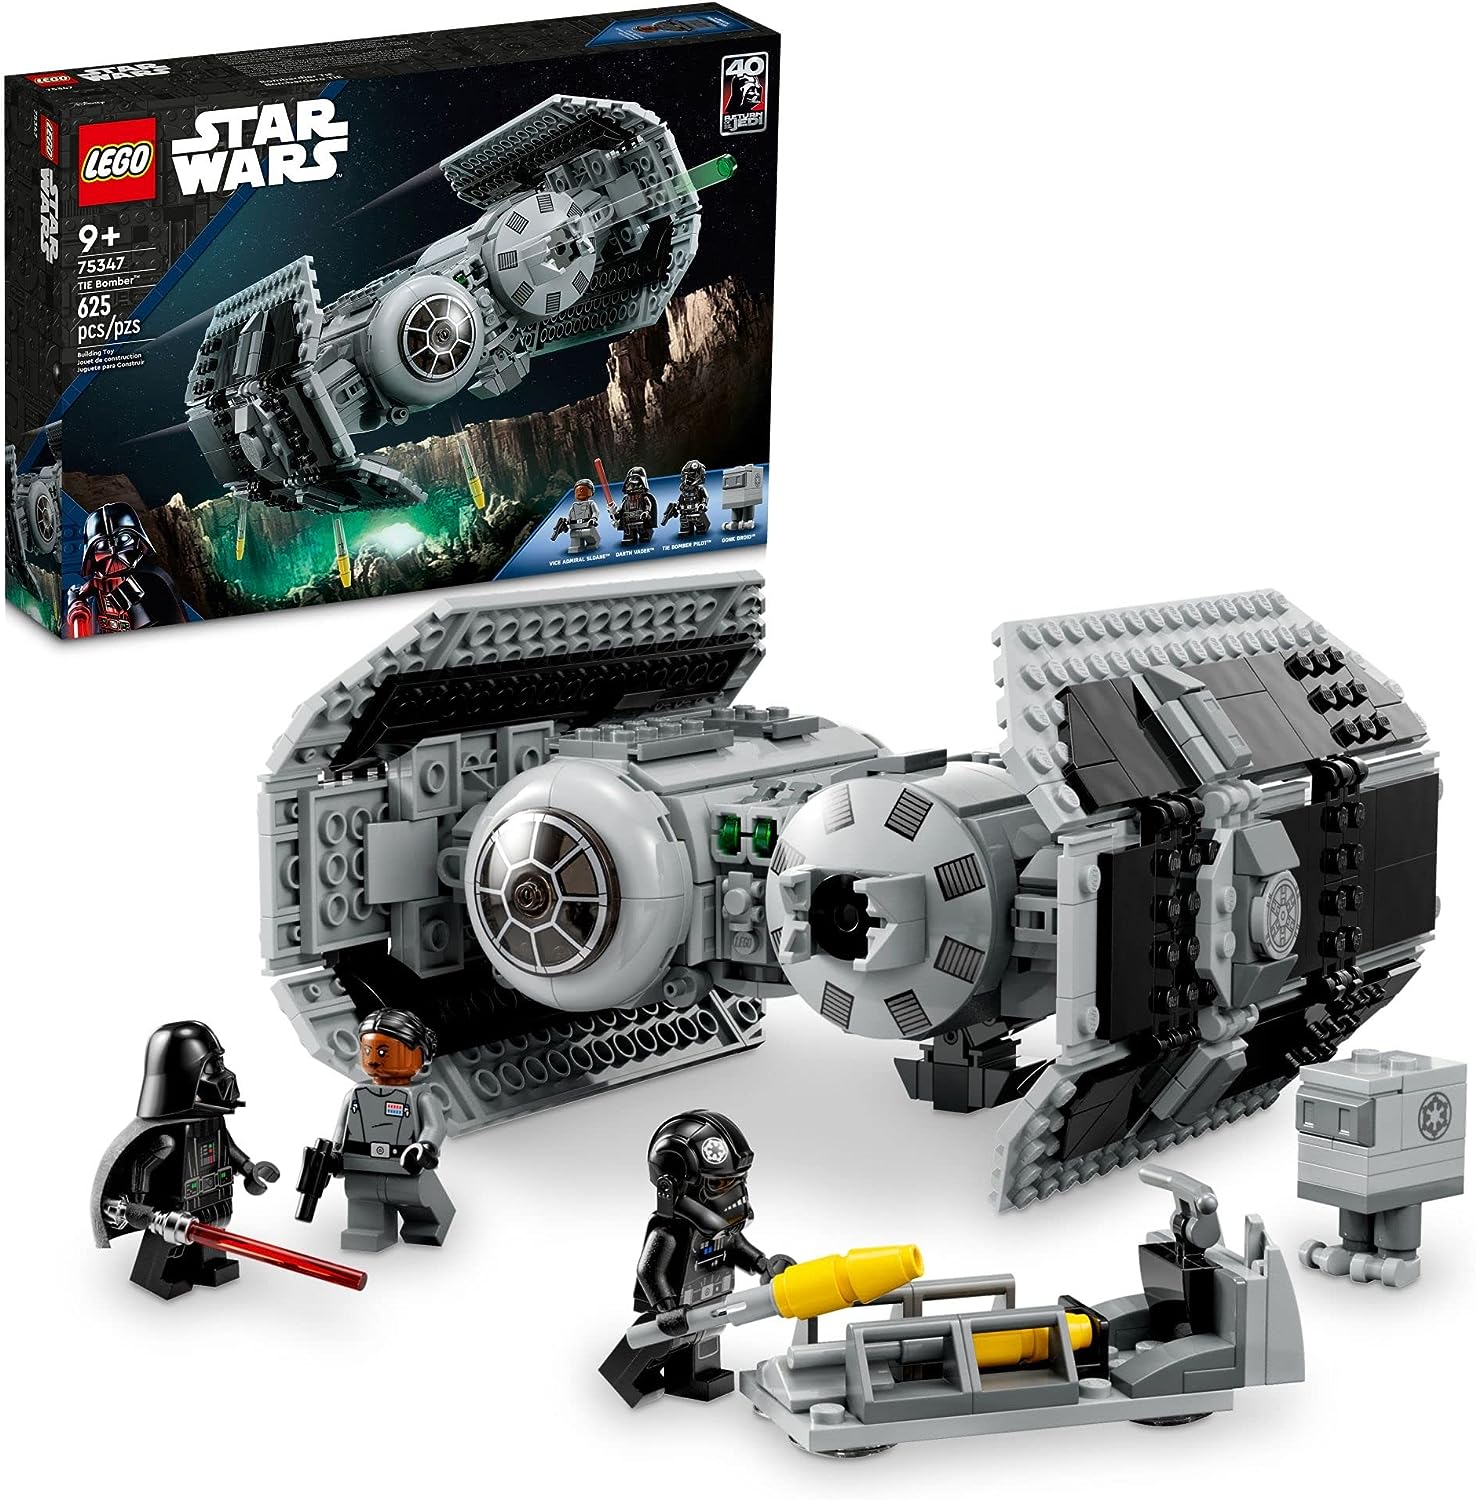 LEGO Star Wars TIE Bomber 75347 Model Building Kit, Star Wars Toy Starfighter with Gonk Droid Figure, Darth Vader Minifigure and Lightsaber